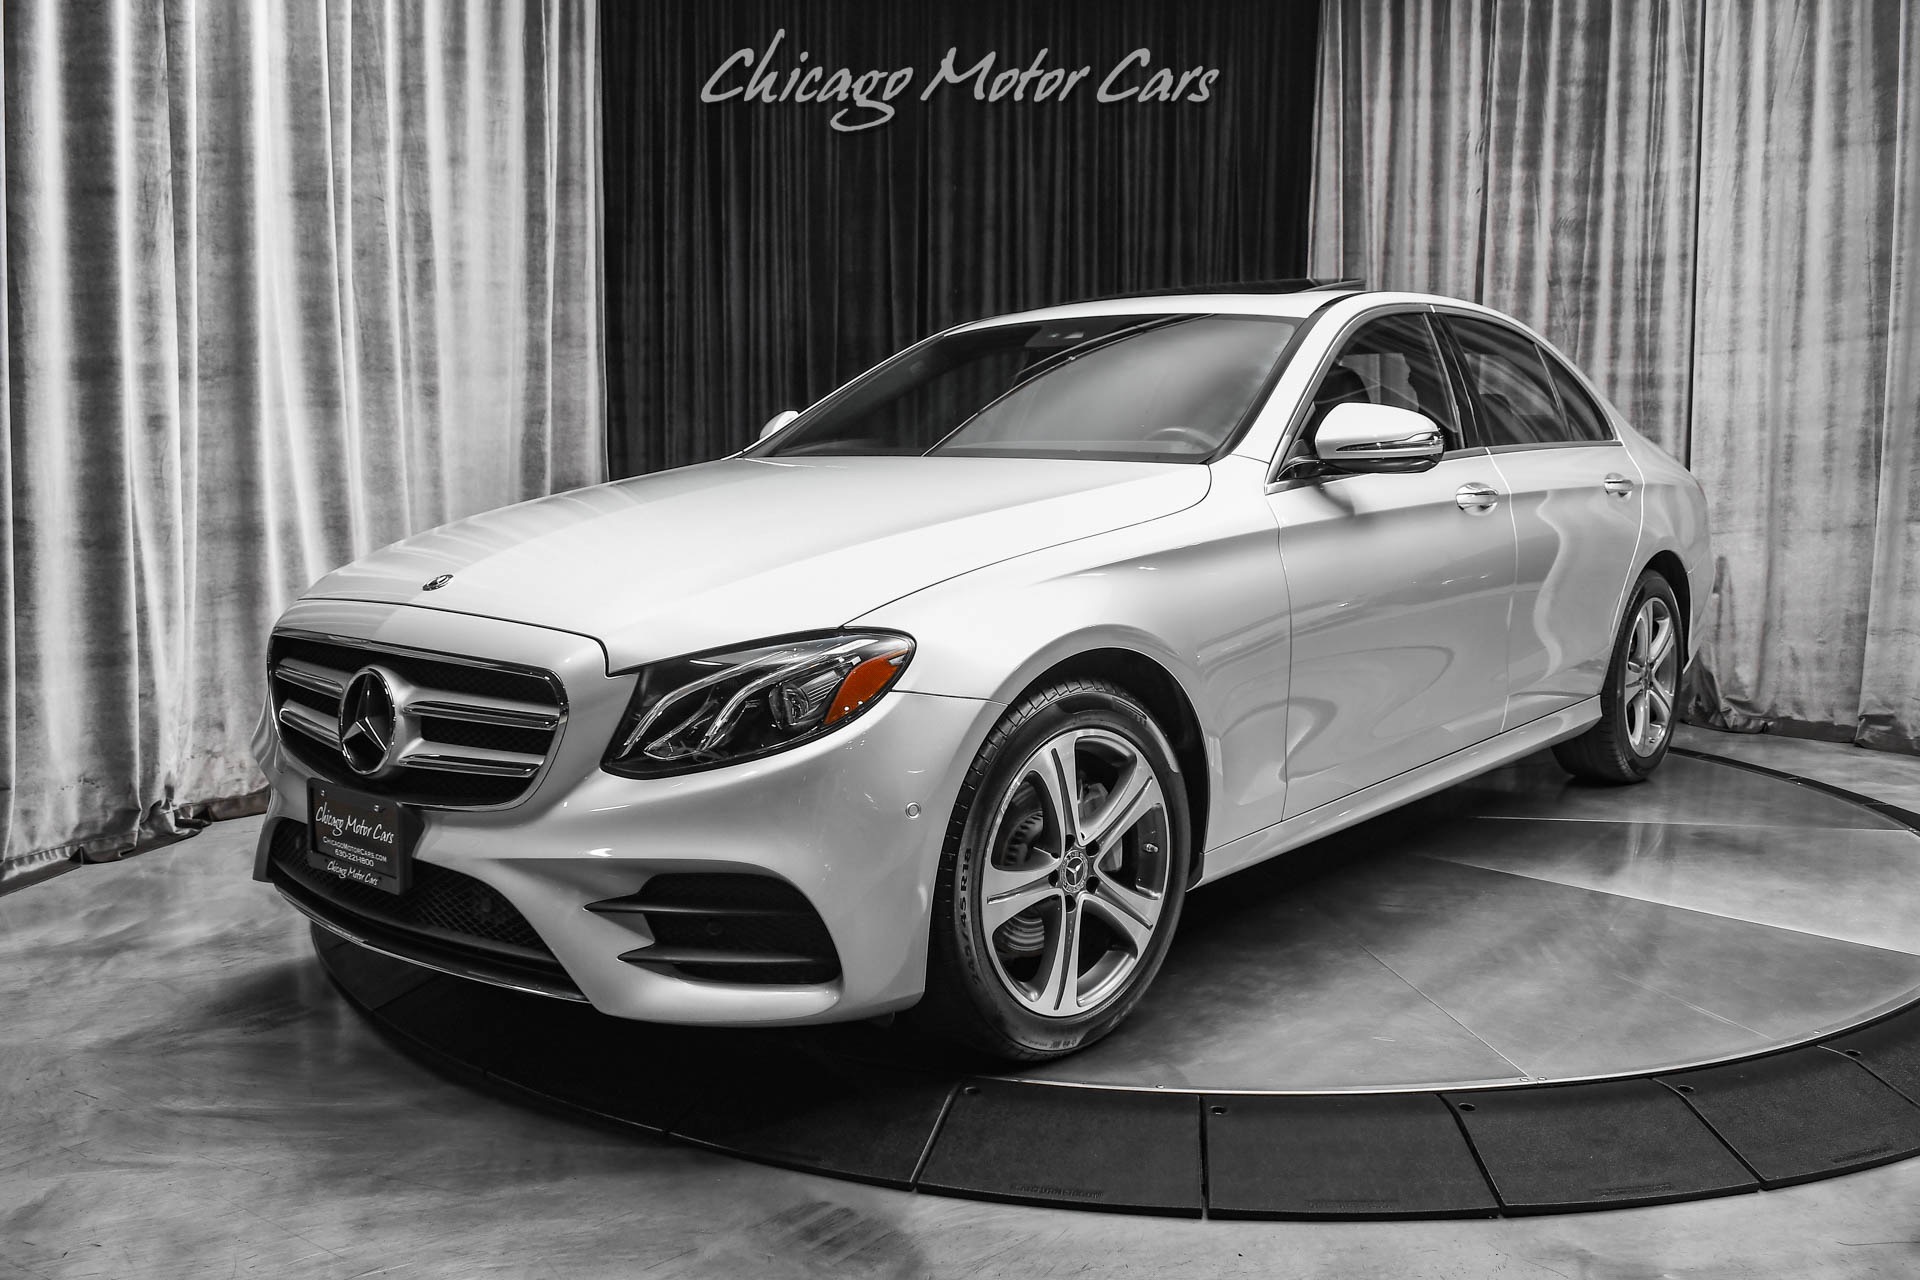 Used-2018-Mercedes-Benz-E300-4Matic-only-22k-Miles-AMG-Sport-Styling-Pkg-Premium-Pkg